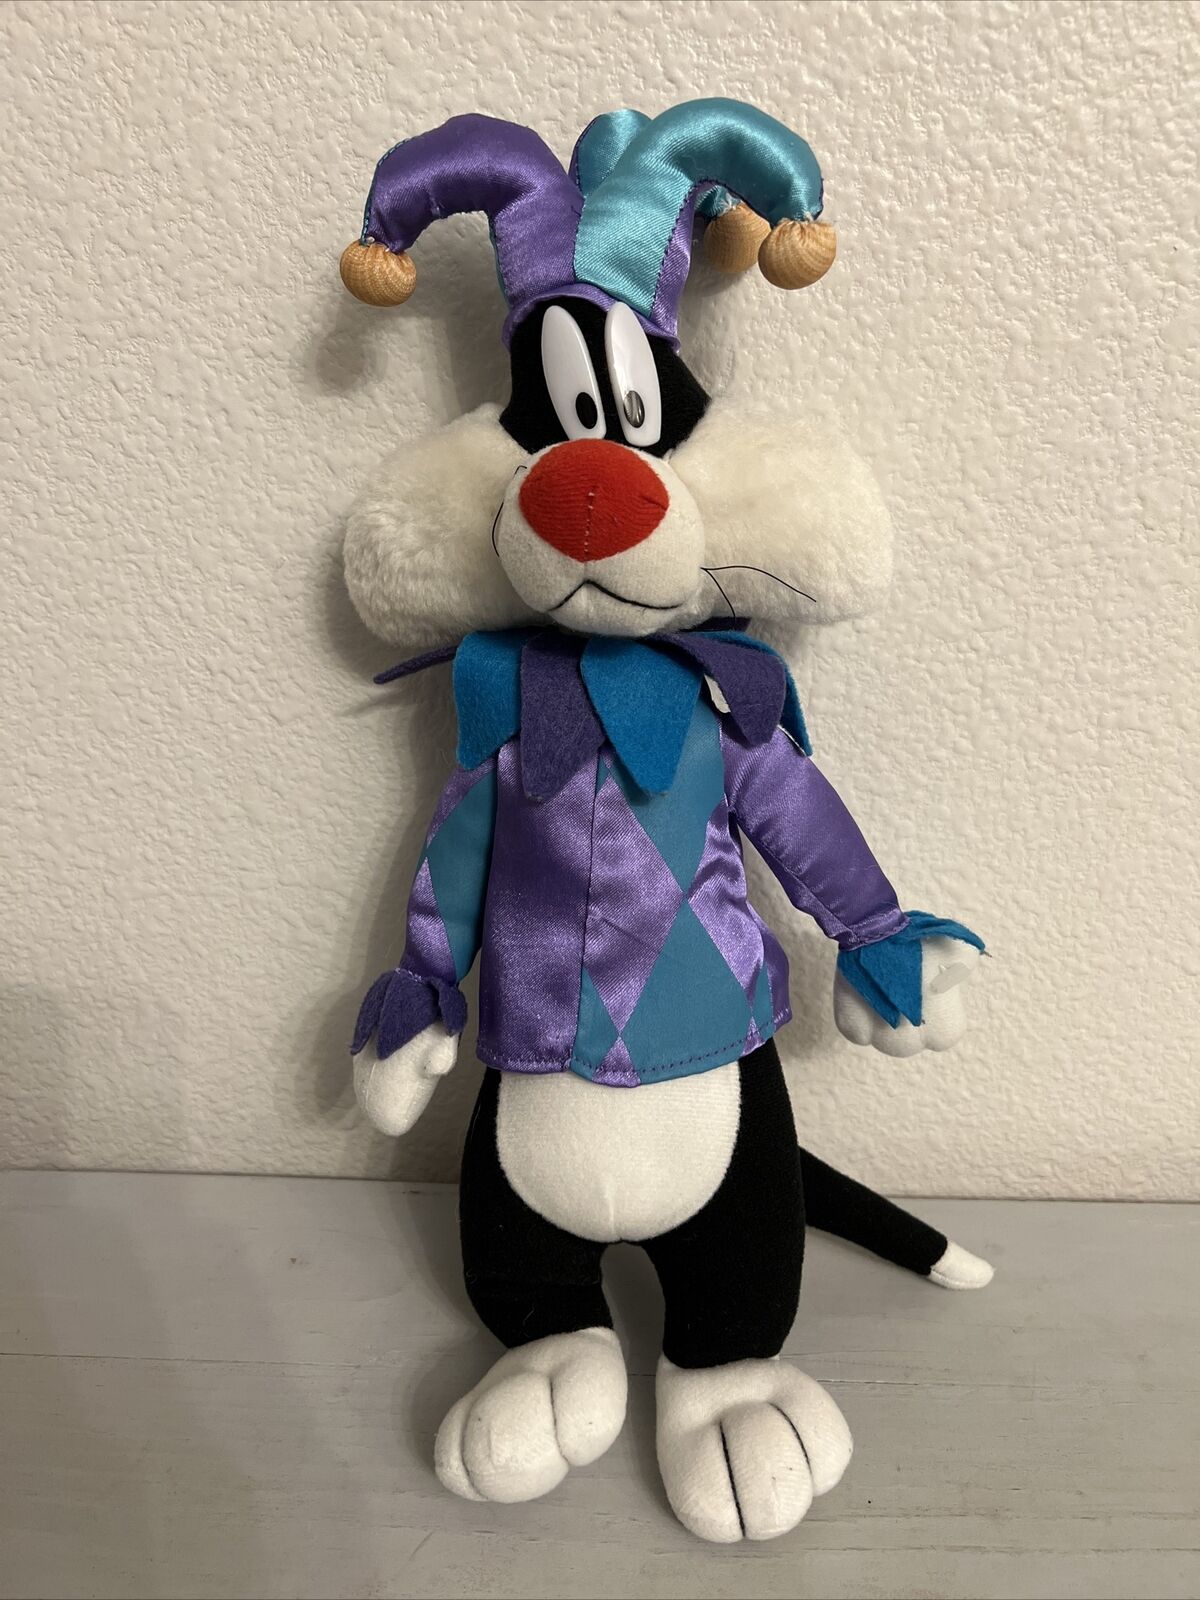 LOONEY TUNES SYLVESTER THE CAT VINTAGE 1997 STUFFED PLUSH TOY (PRE-OWNED)